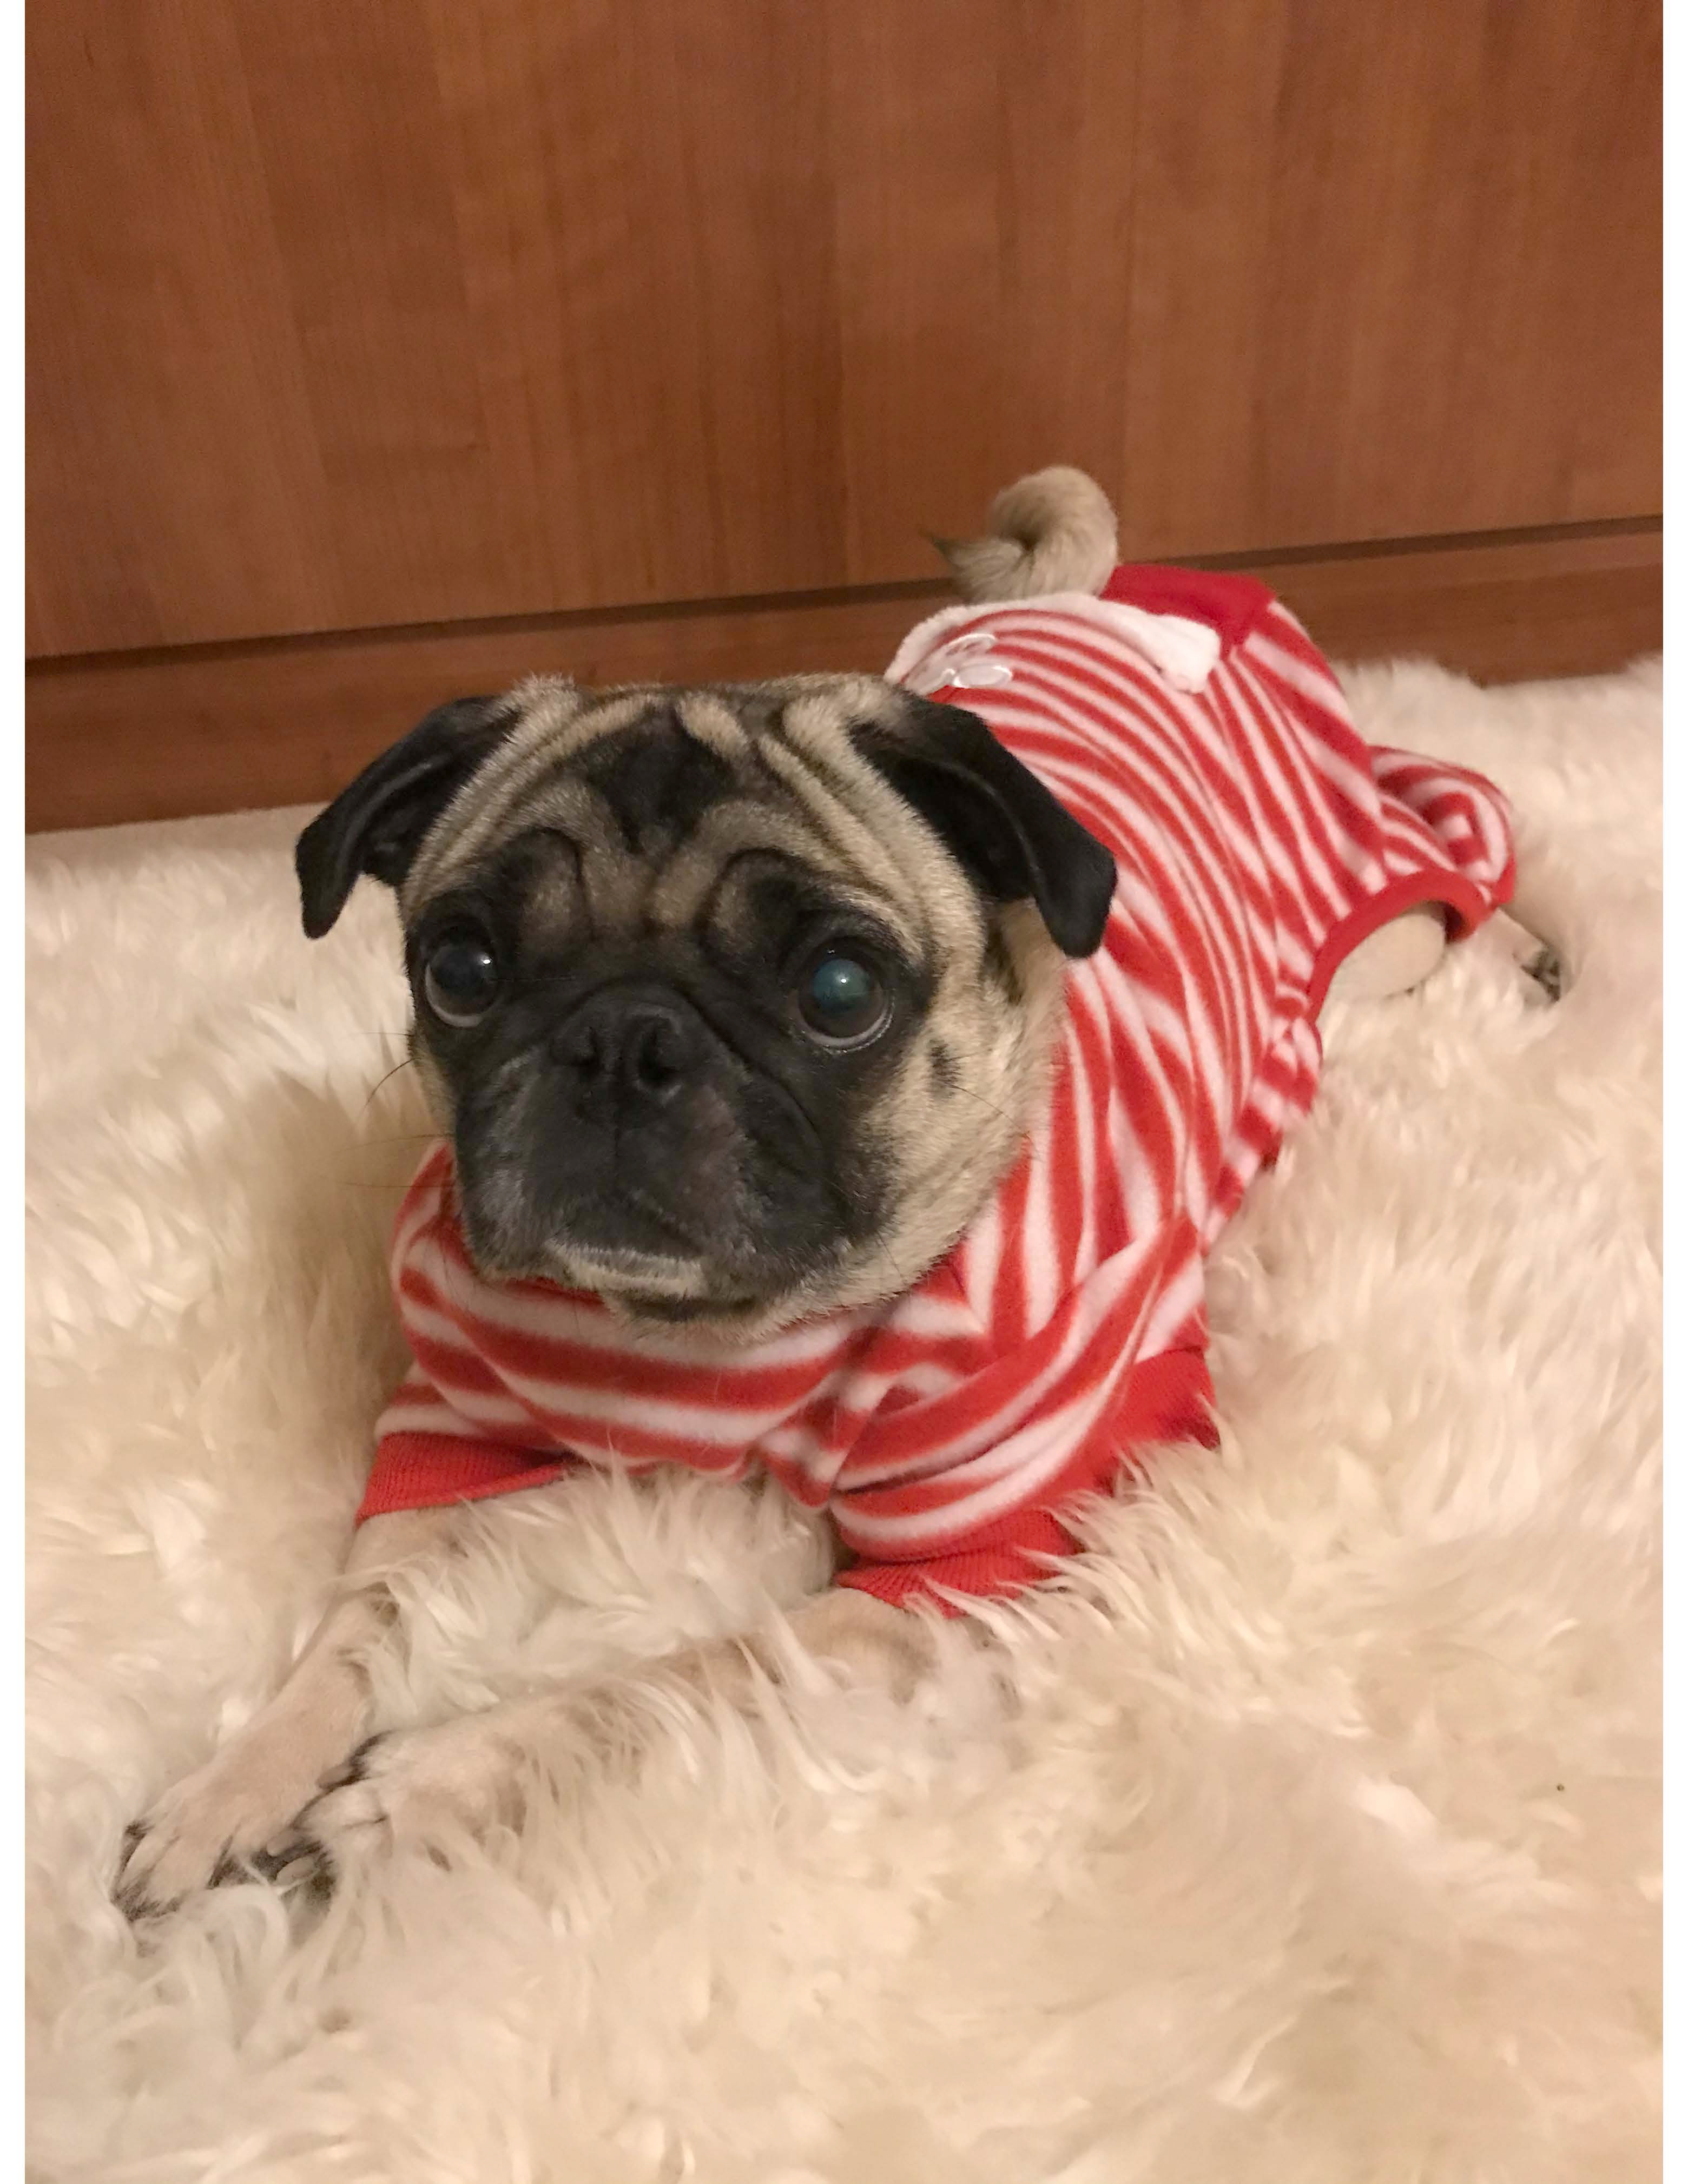 Are Pugs a Good Choice for First Time Dog Owners?